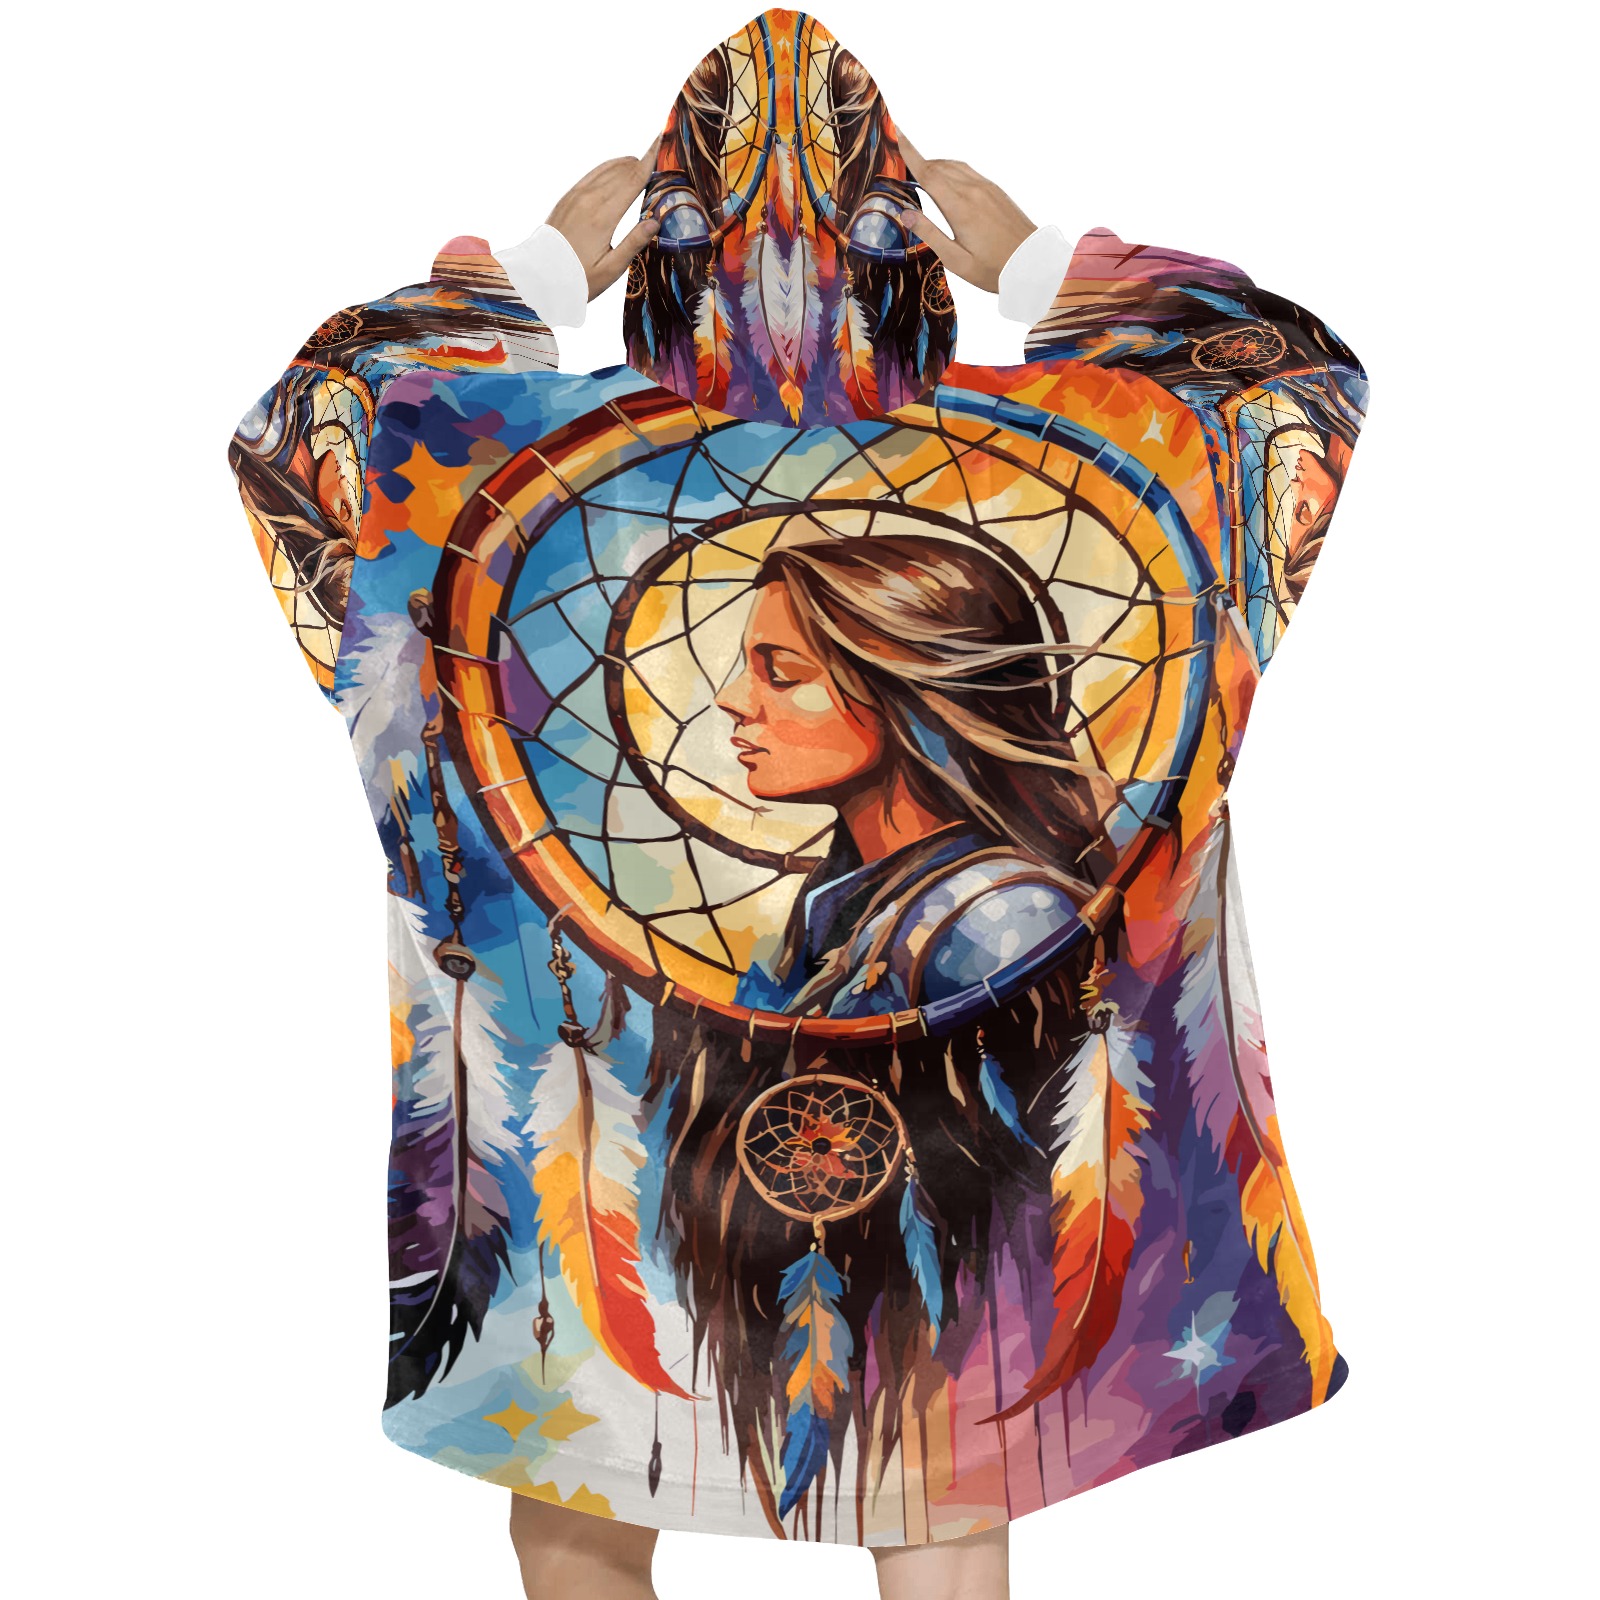 Dreaming woman inside a dreamcatcher colorful art. Blanket Hoodie for Women